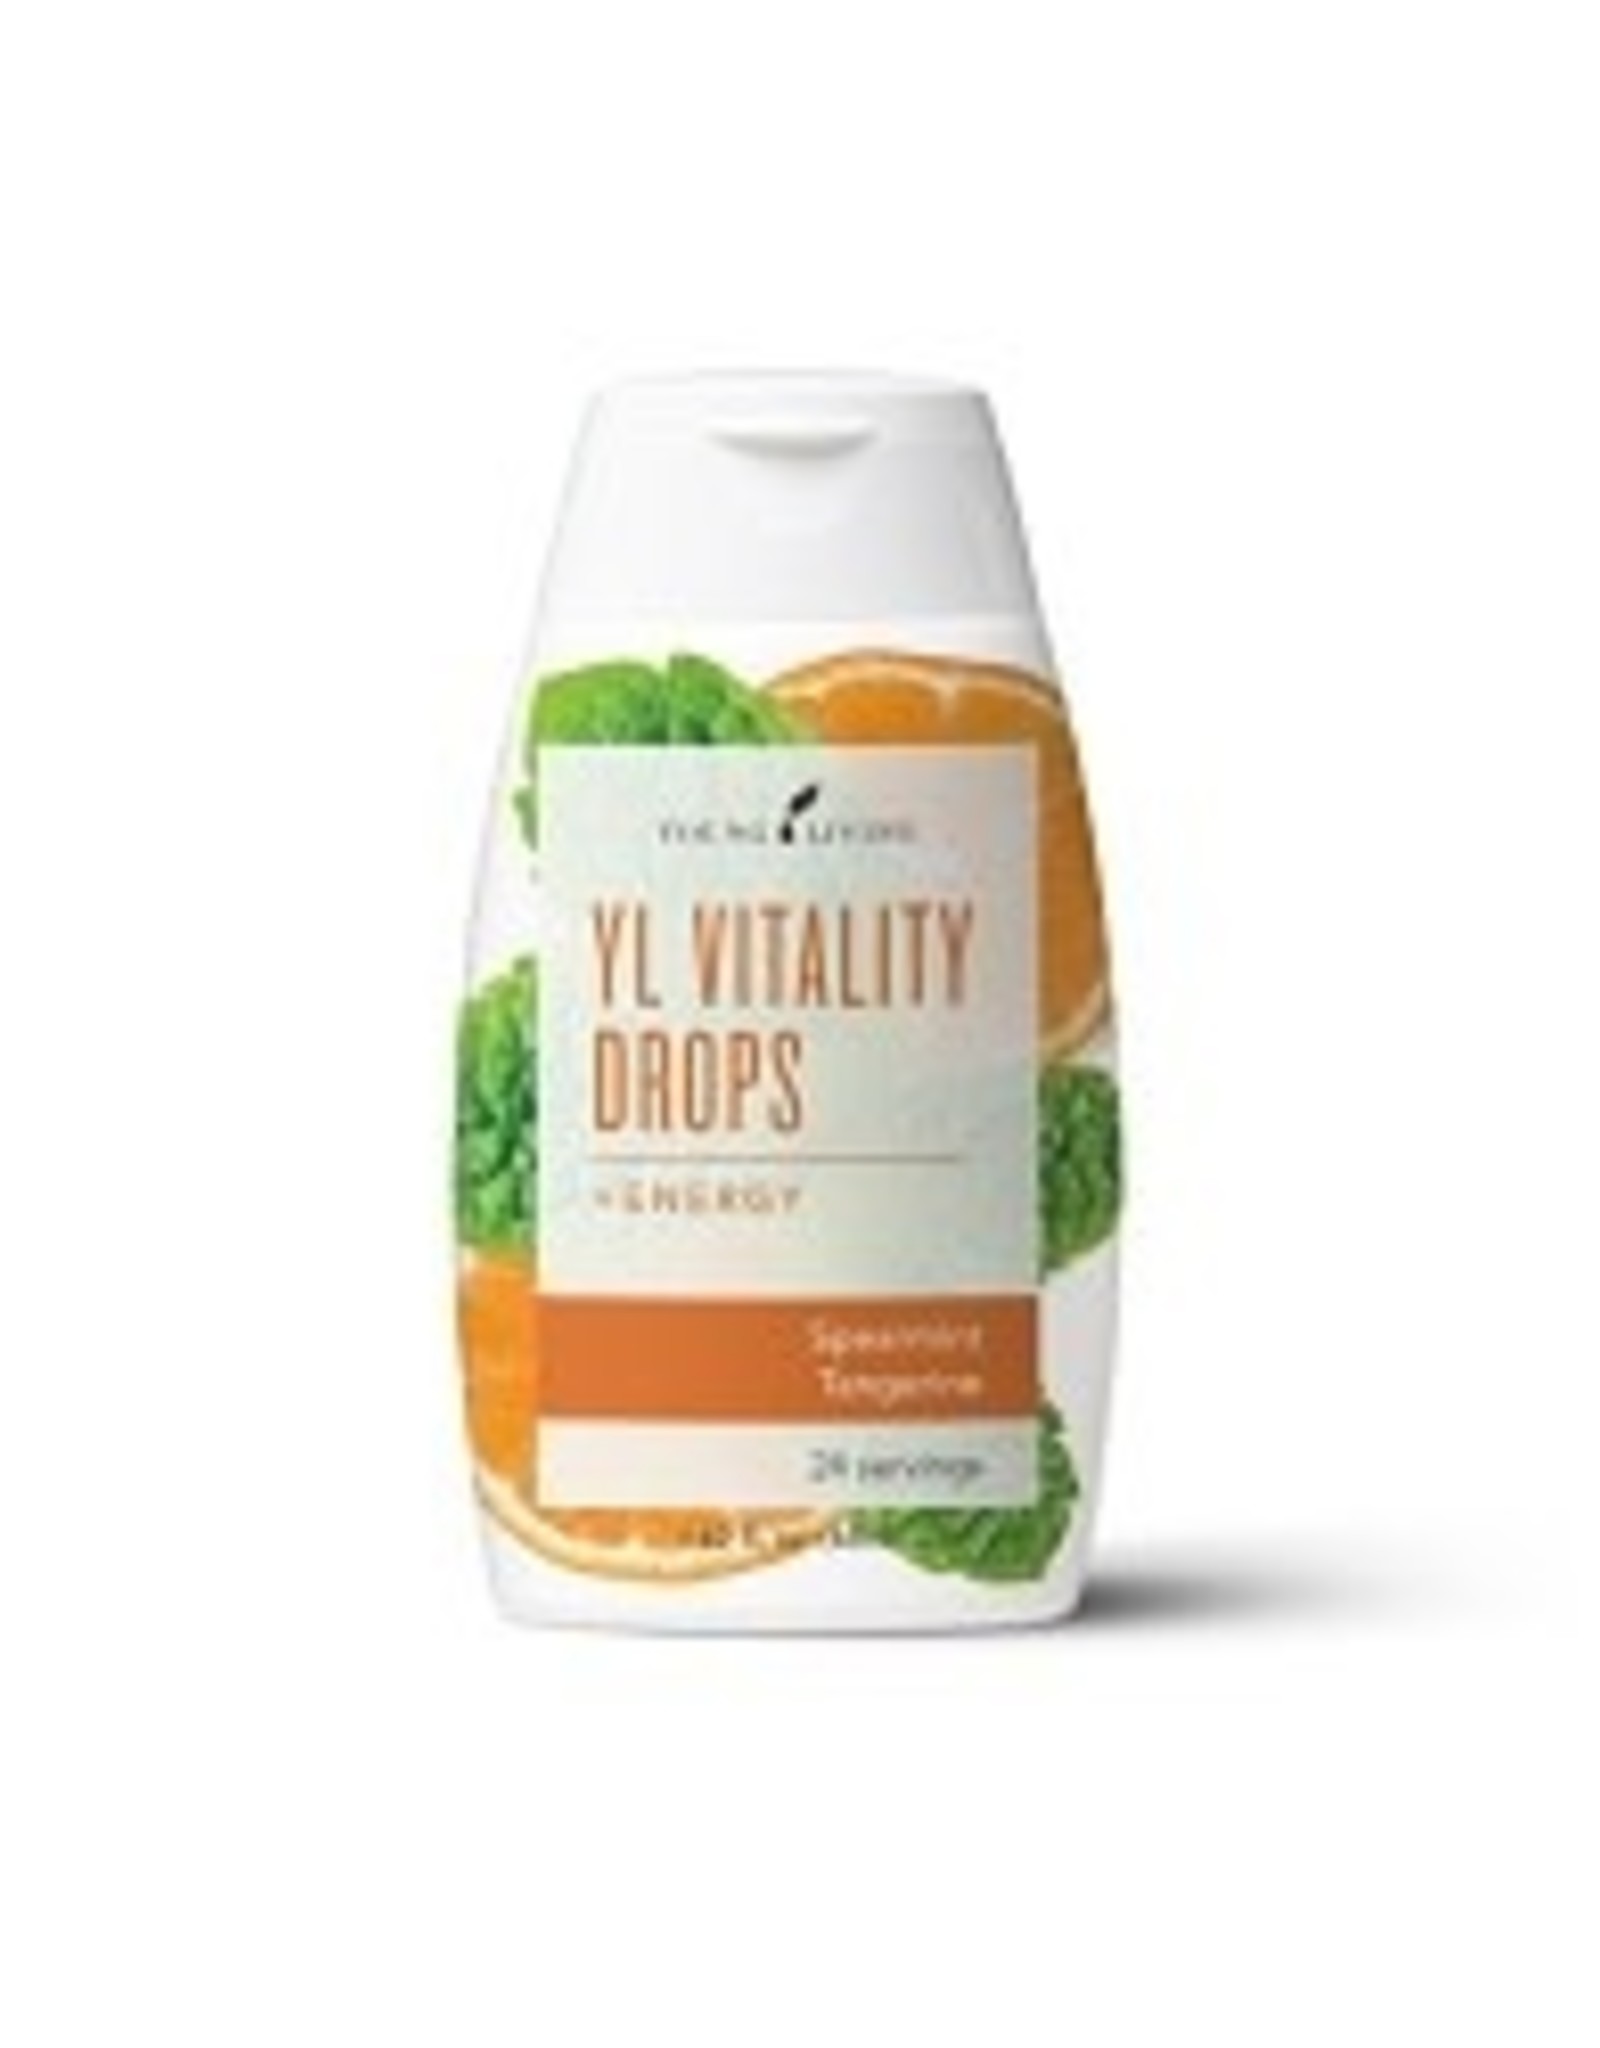 Young Living Vitality Drops Energy Spearmint Tangerine